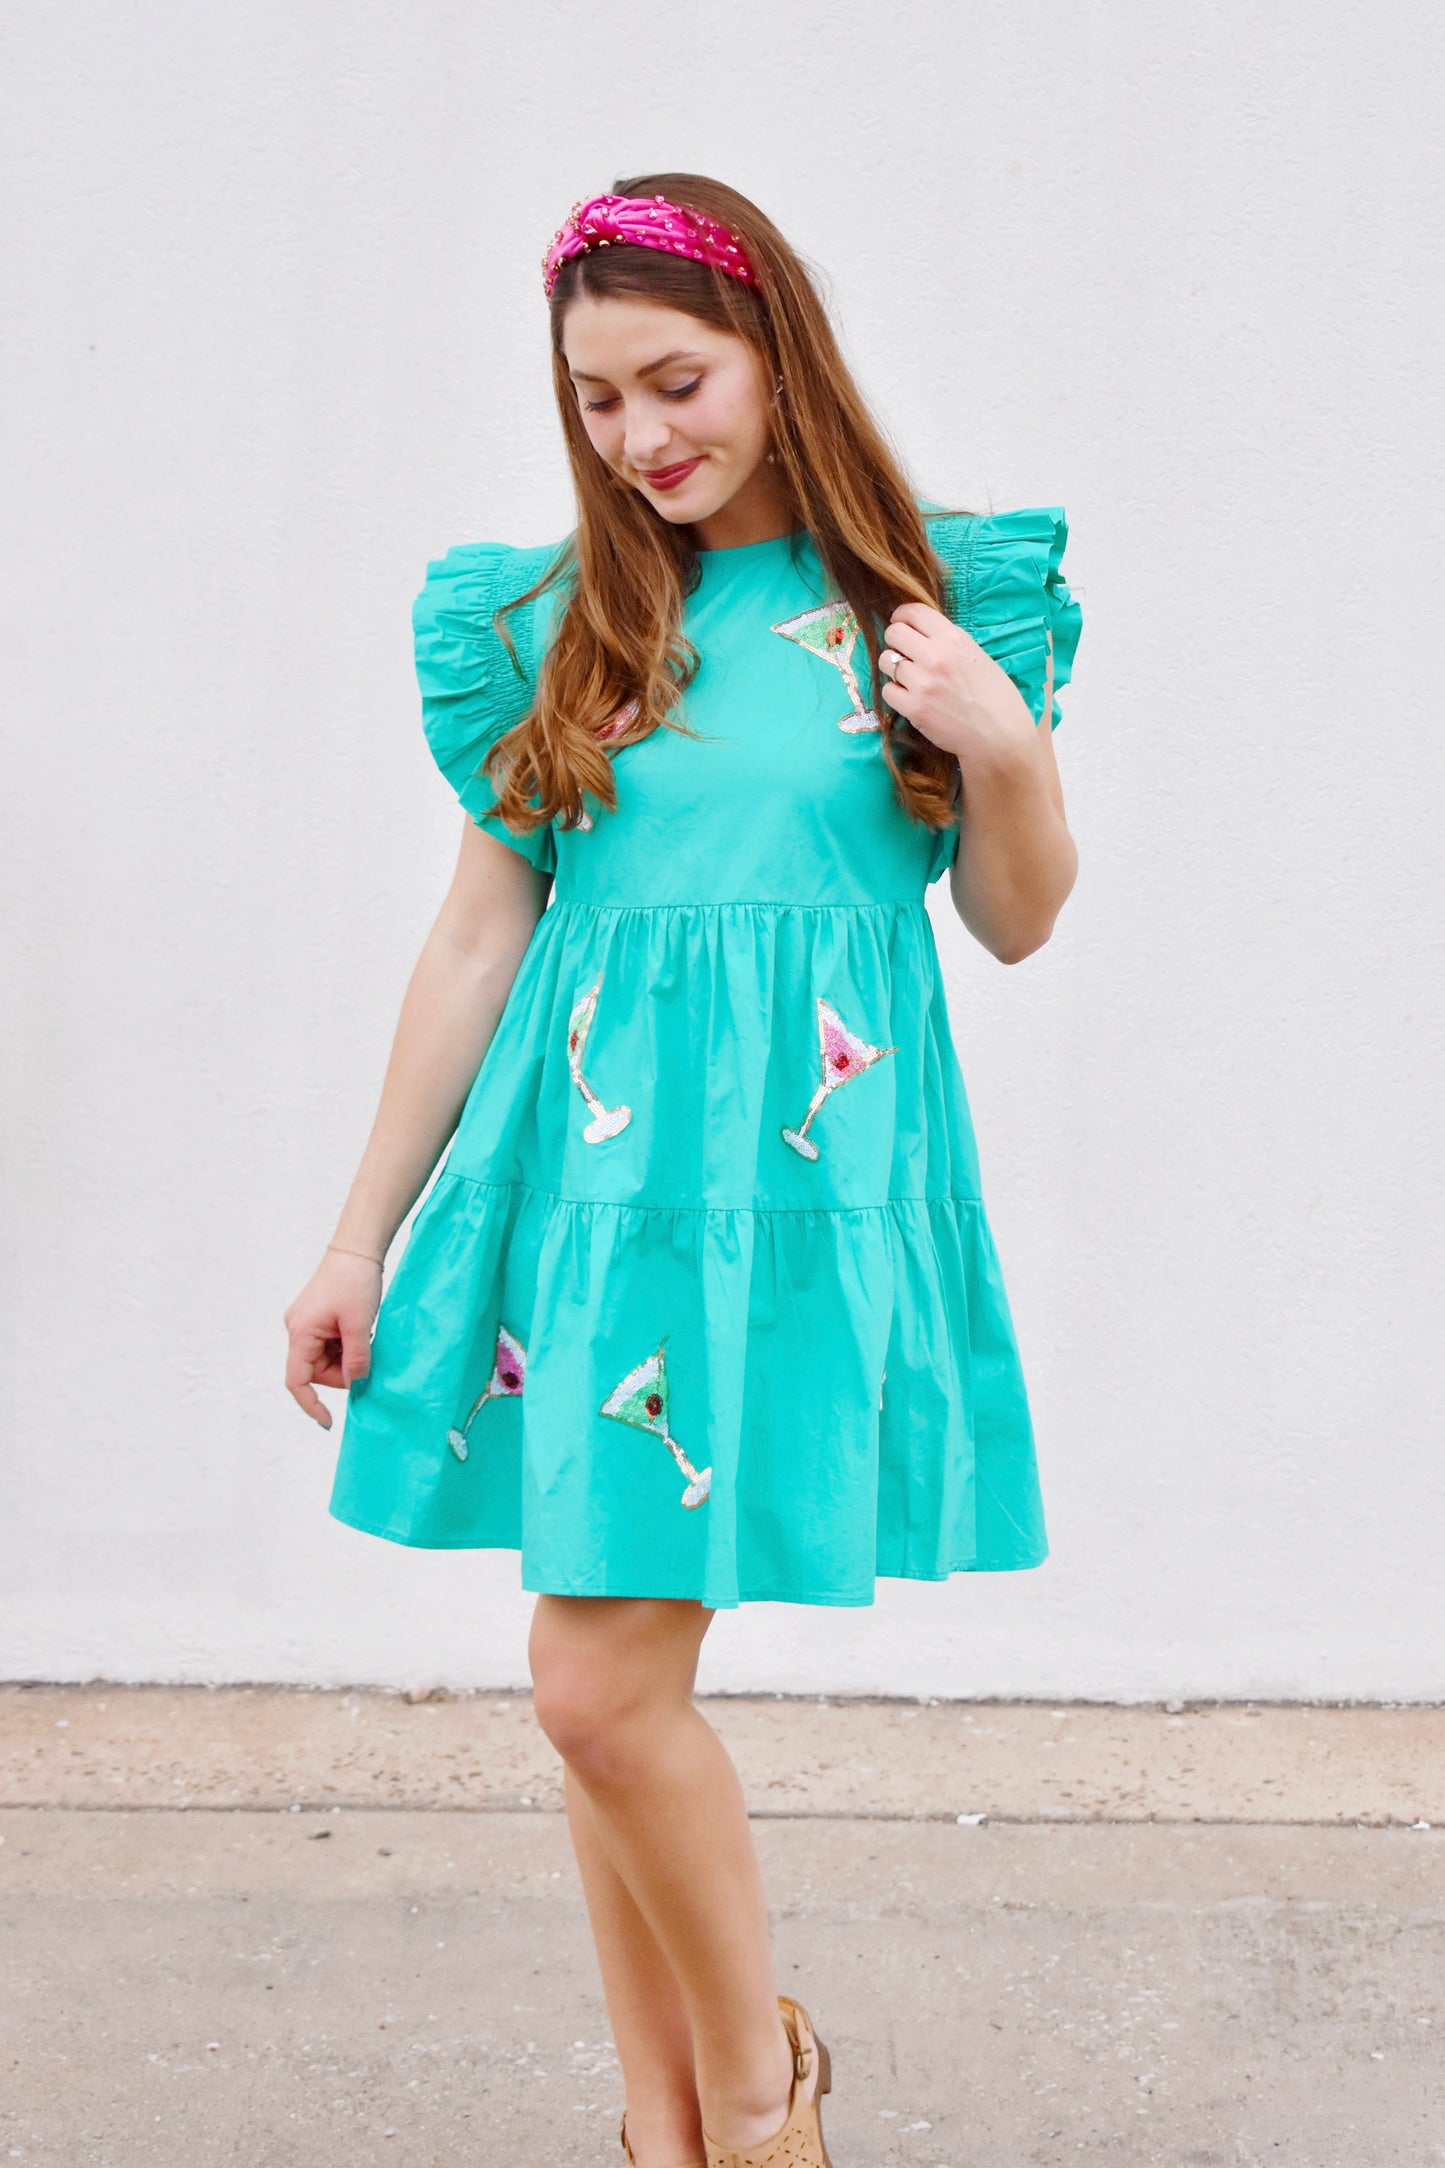 Martini Patch Turquoise Dress